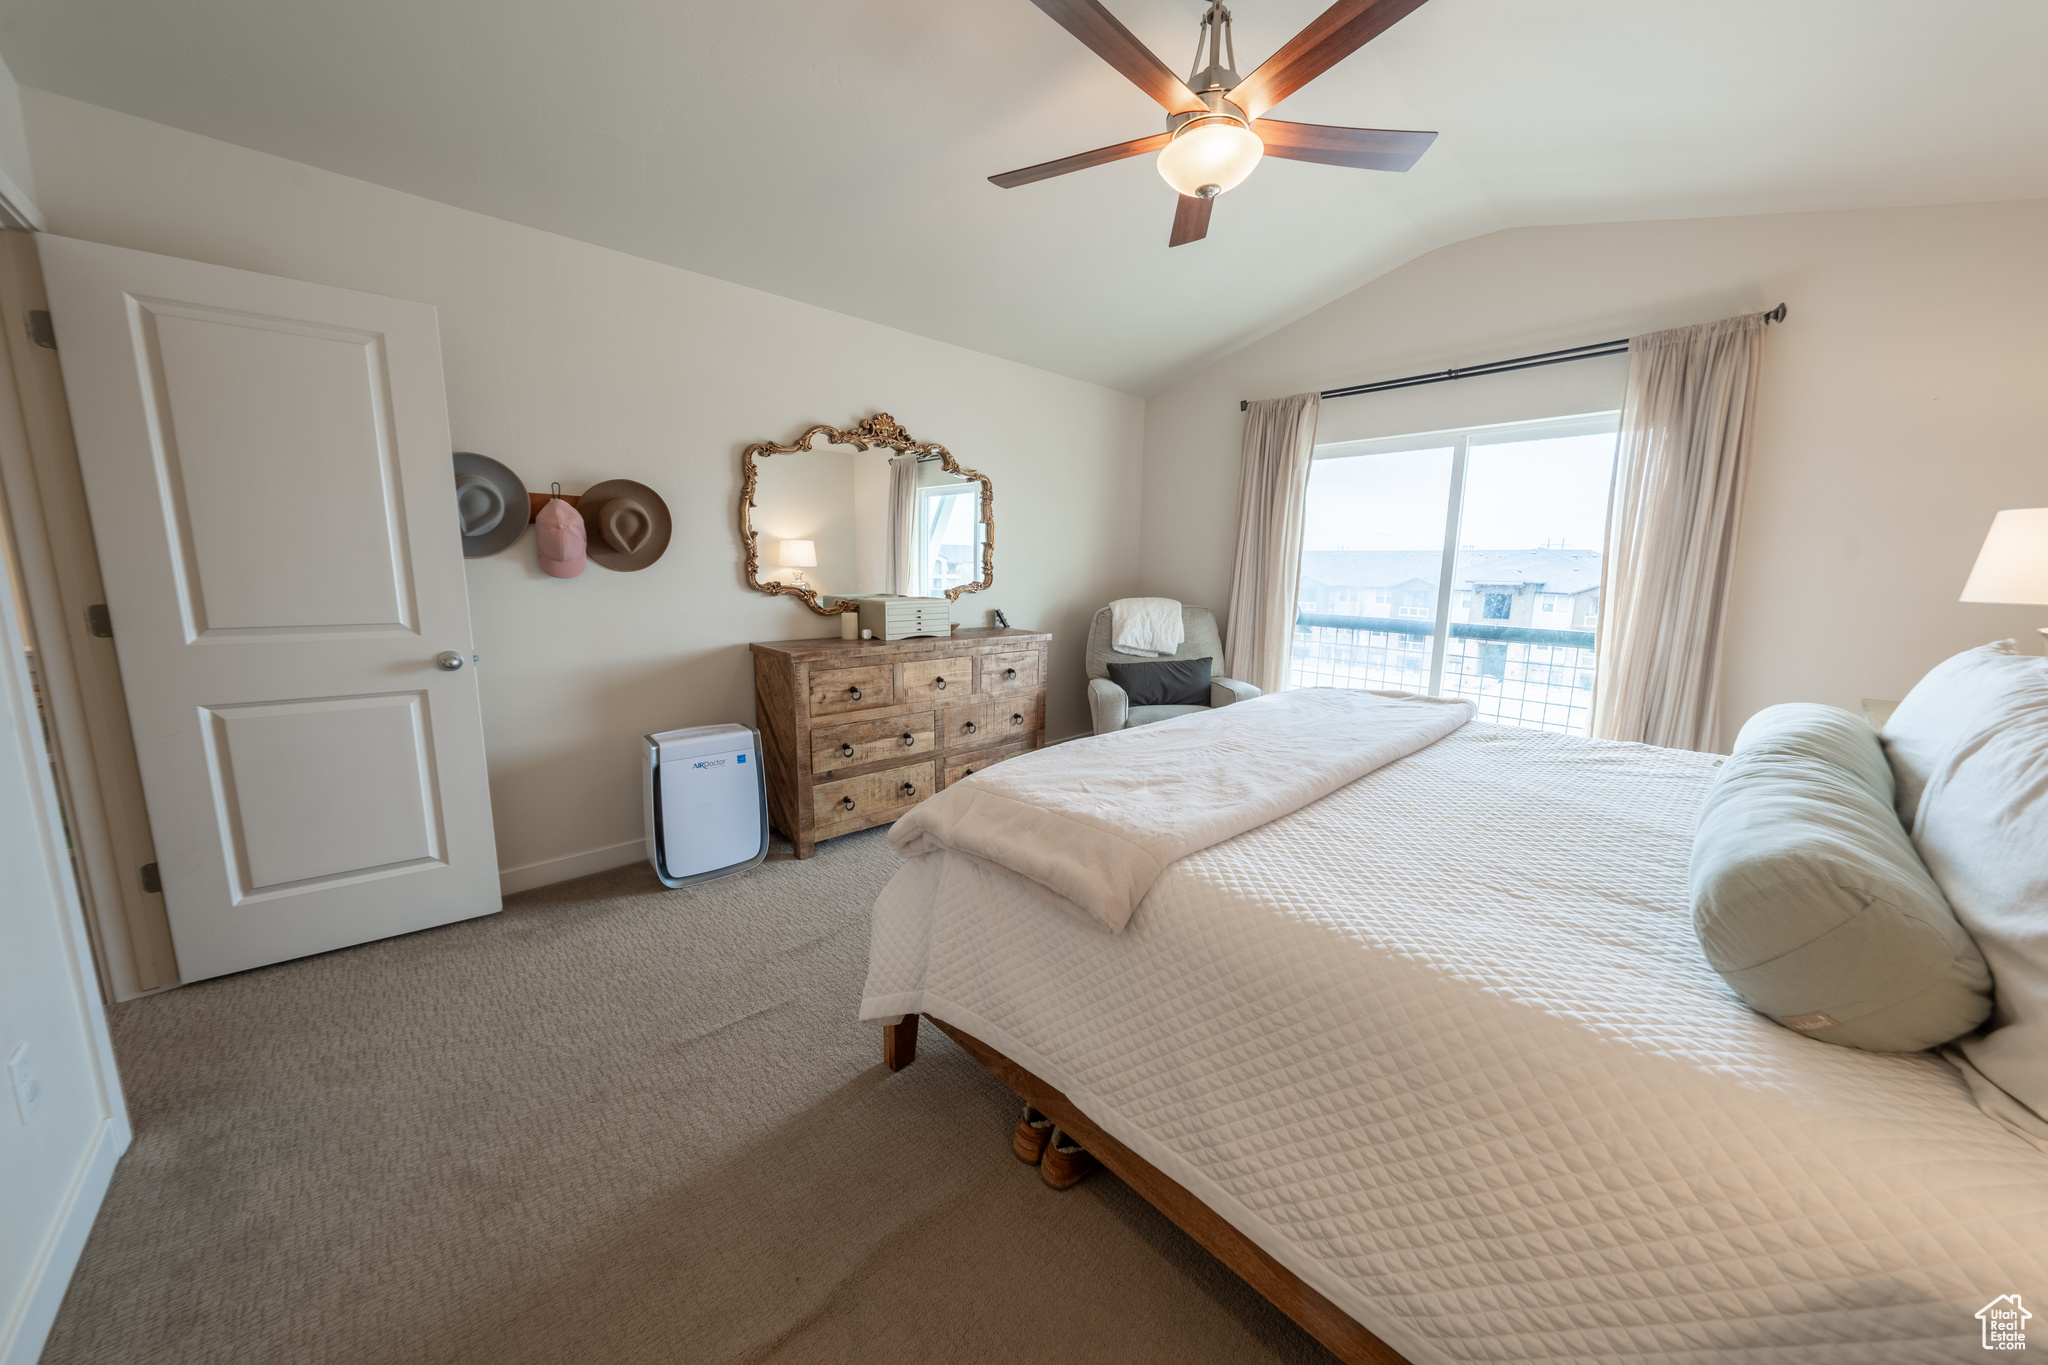 Bedroom featuring access to outside, lofted ceiling, ceiling fan, and light colored carpet